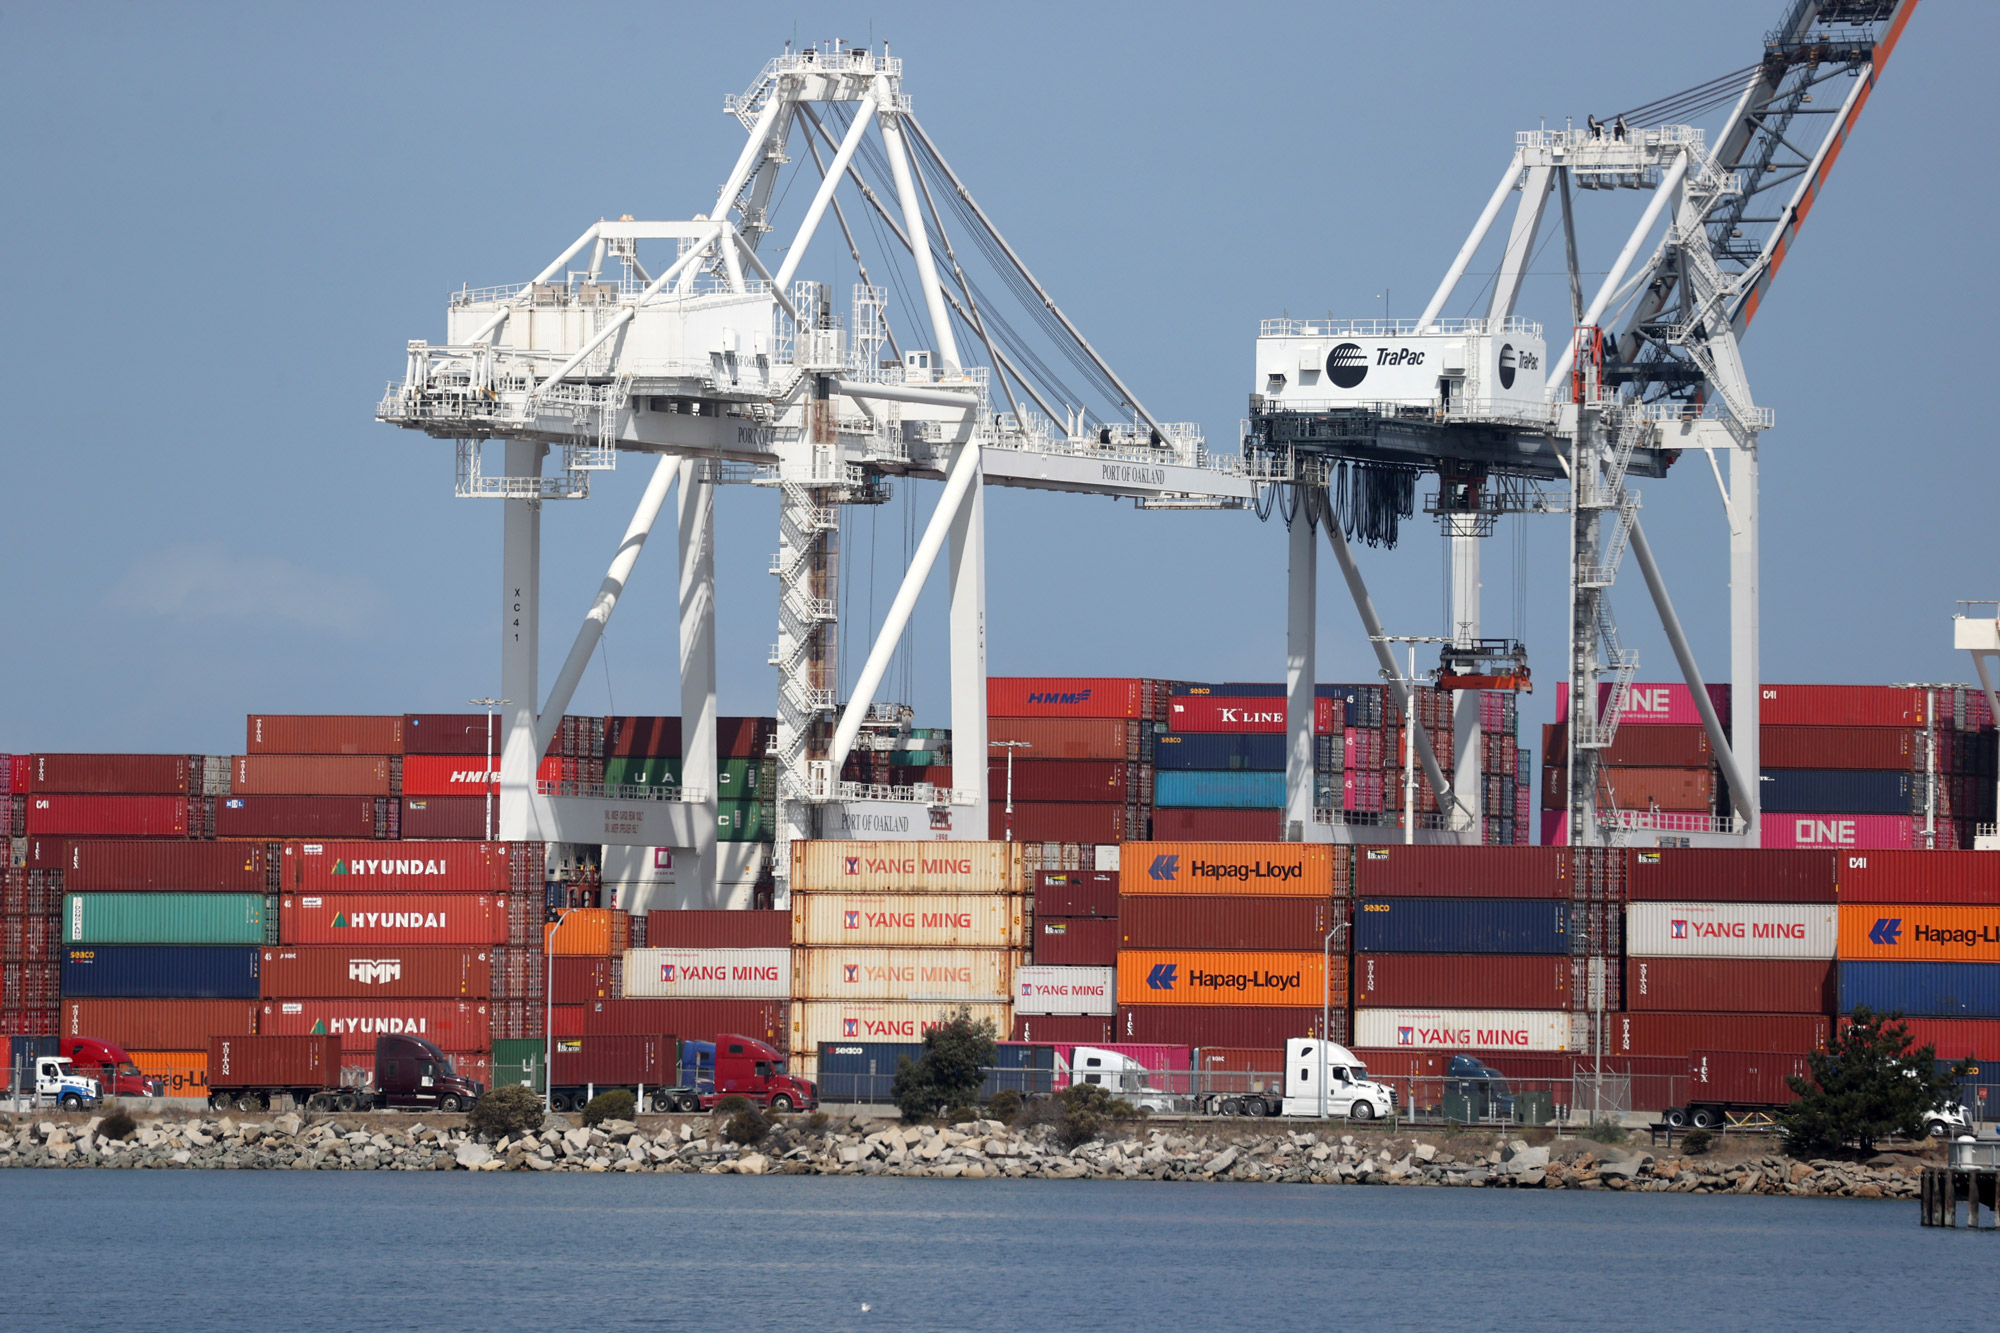 Shipping containers sit on the dock at the Port of Oakland on September 18 in Oakland, California.